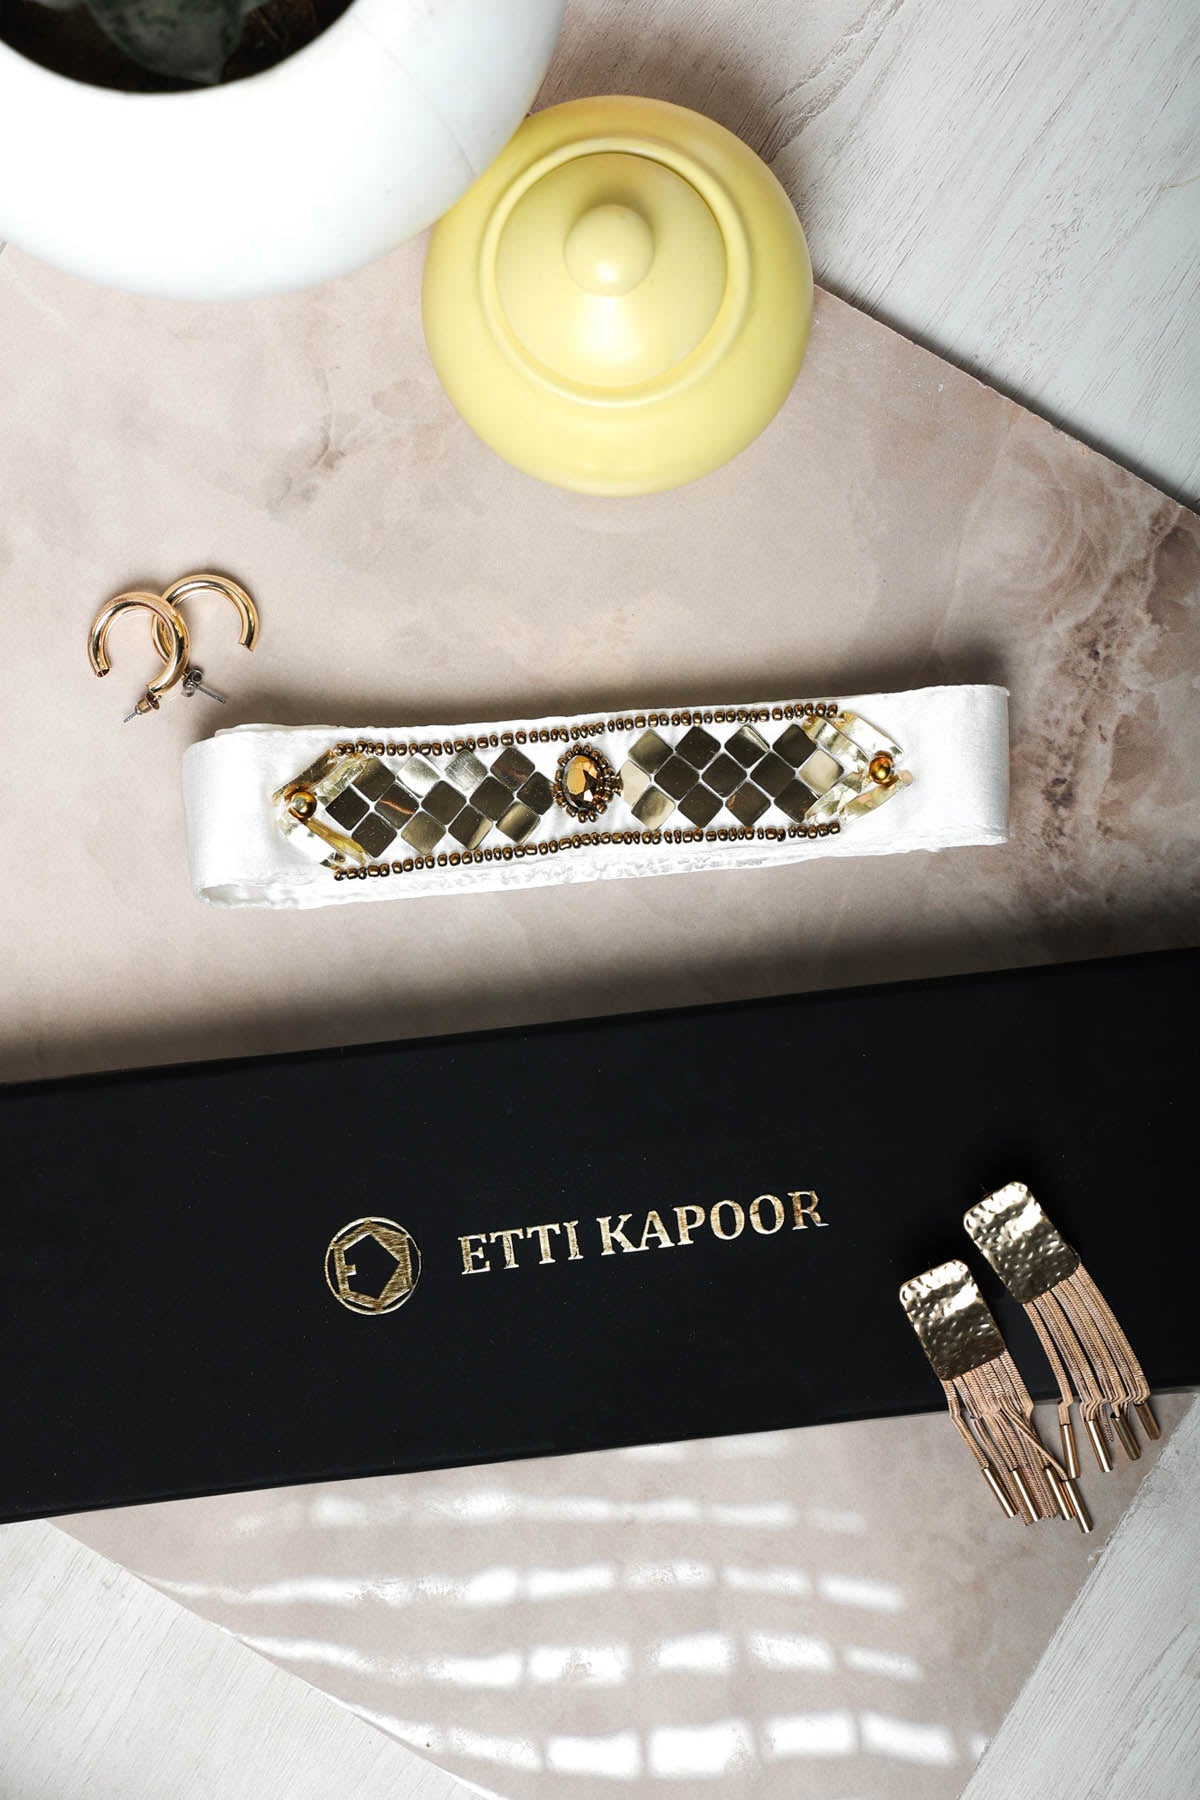 Etti Kapoor White & Gold Embellished Belt Accessories online at ScrollnShops